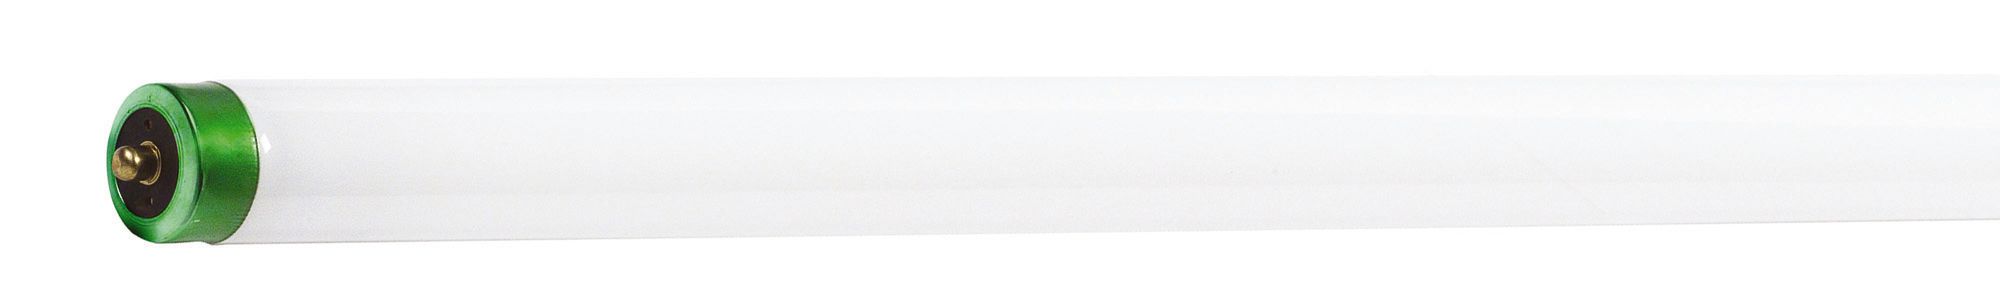 236844 (F96T8/TL835/PLUS/ALTO) Linear Fluorescent Lamp Philips Lighting;Signify Lamps